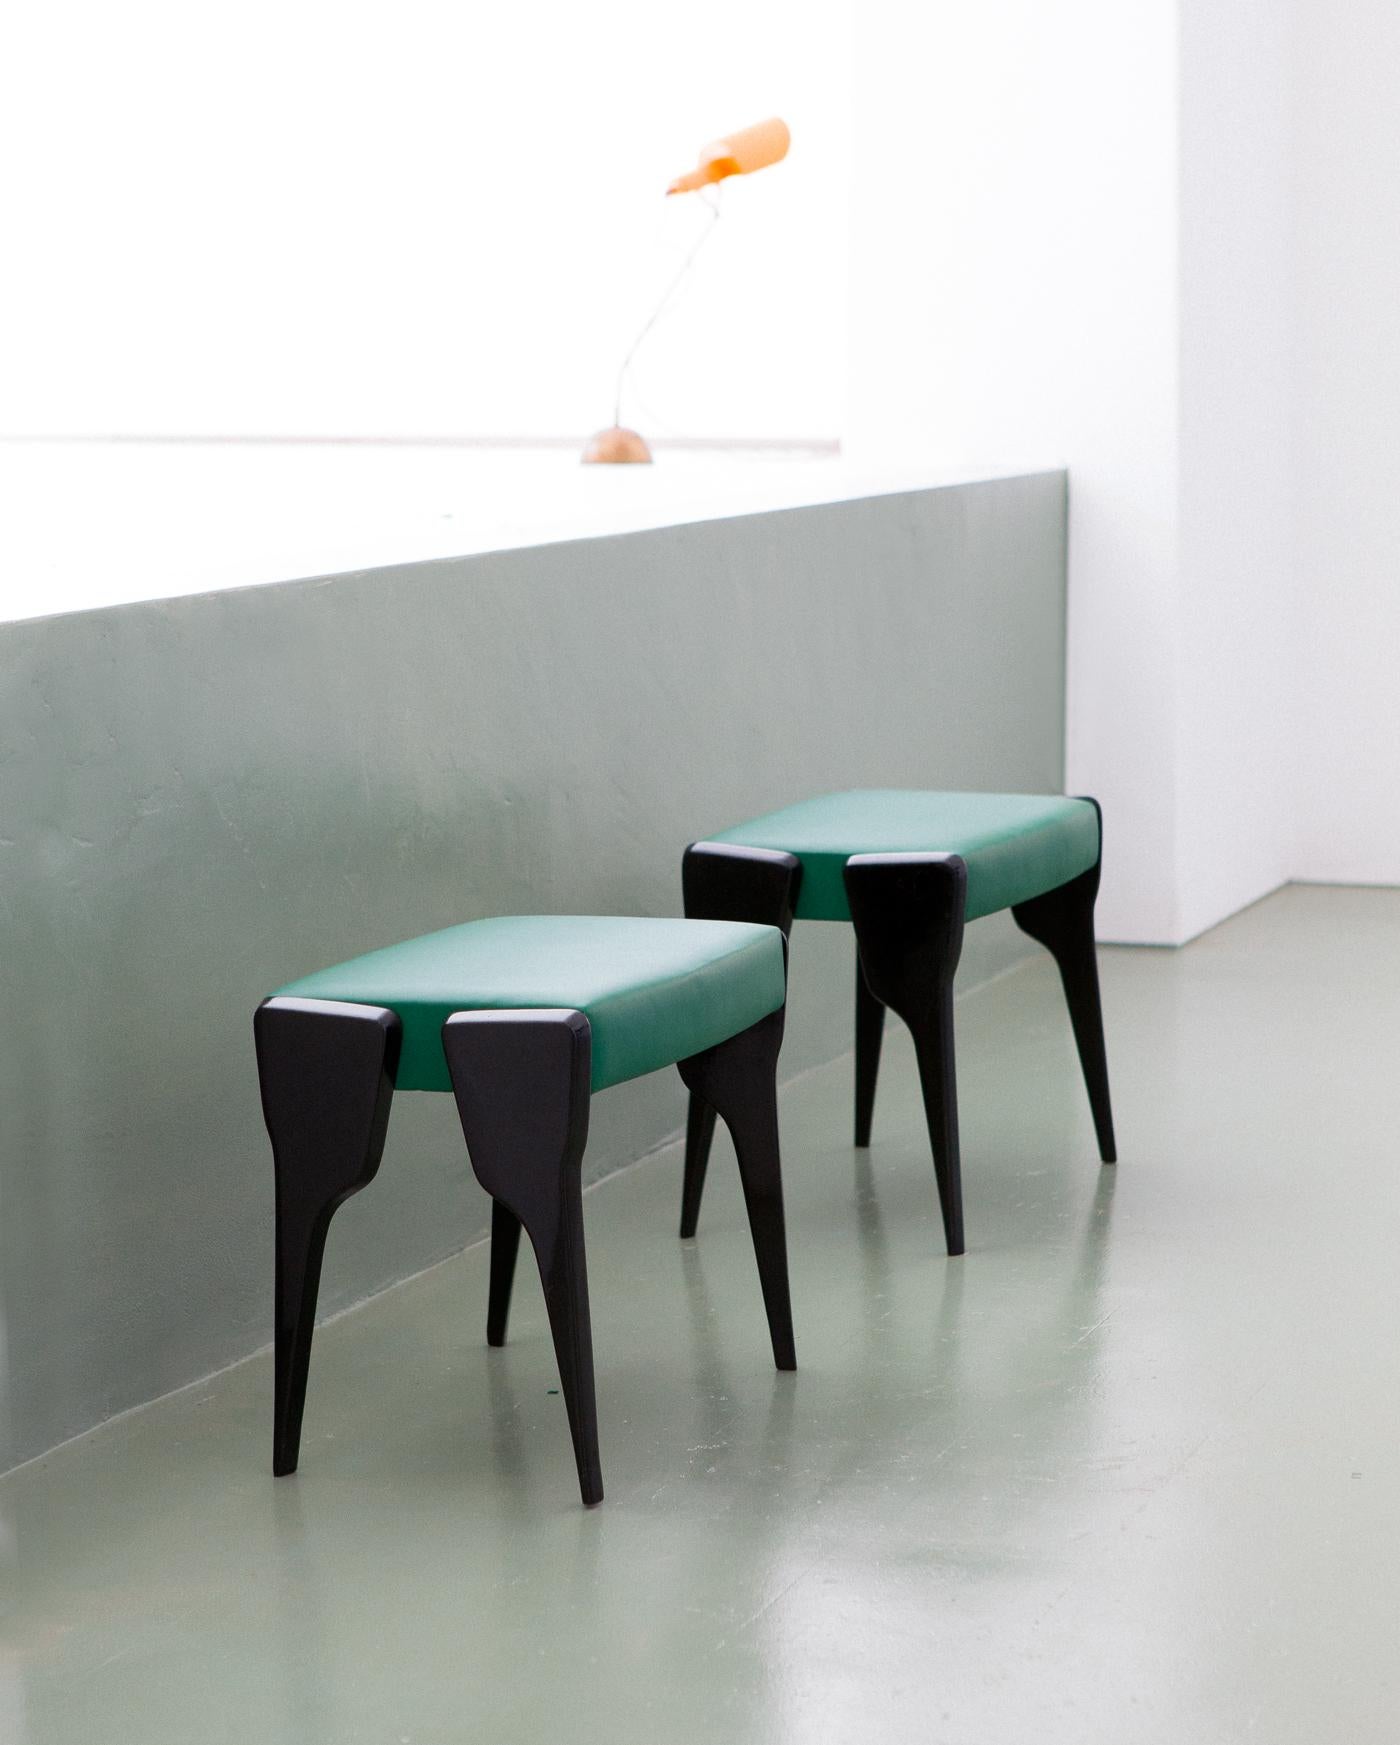 Mid-20th Century Pair of Italian Modern Stool with Black Mahogany Legs and Natural Green Leather